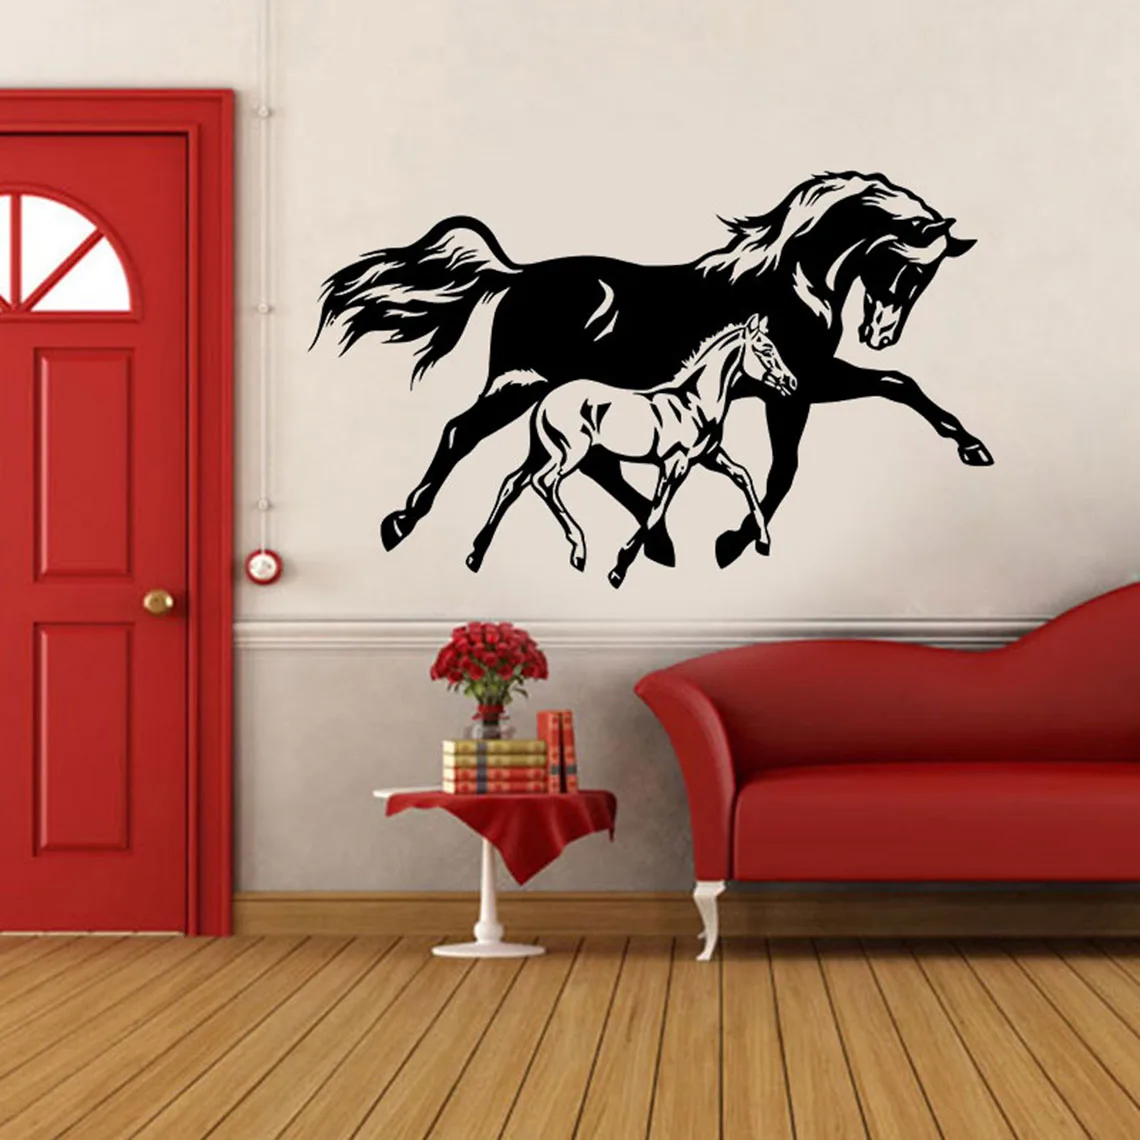 

Wall Art Mural Sticker Horse Animal Wall Decal Vinyl Handsome Horse Stickers Decoration for Bedroom Children's Room P971